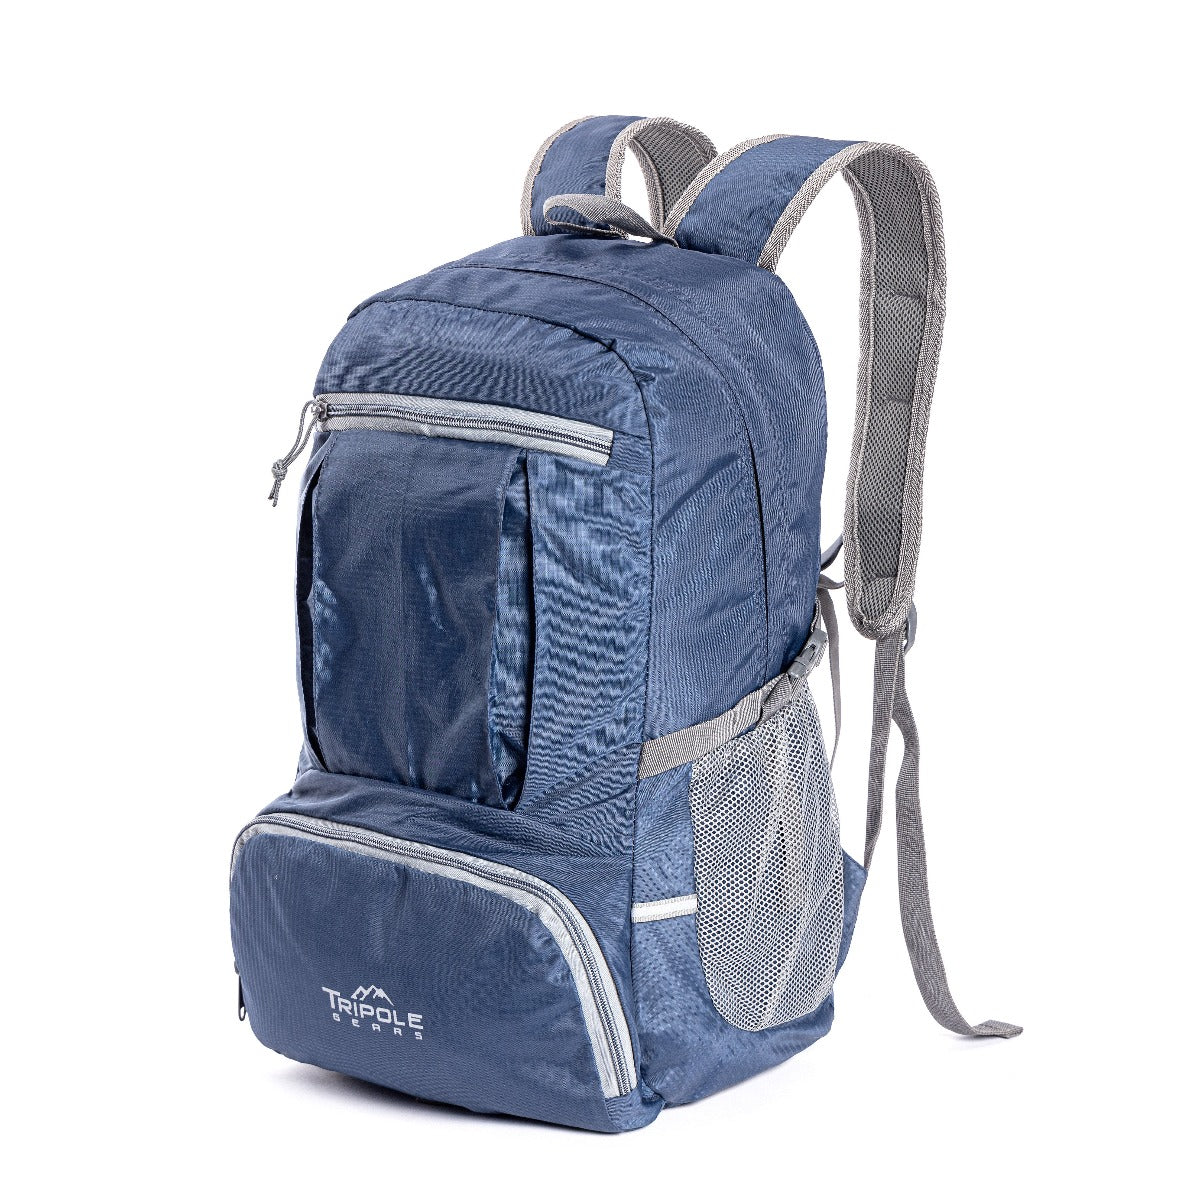 Foldable PAKEASY Backpack and Day Bag for Hiking and Day Trips - Blue 1